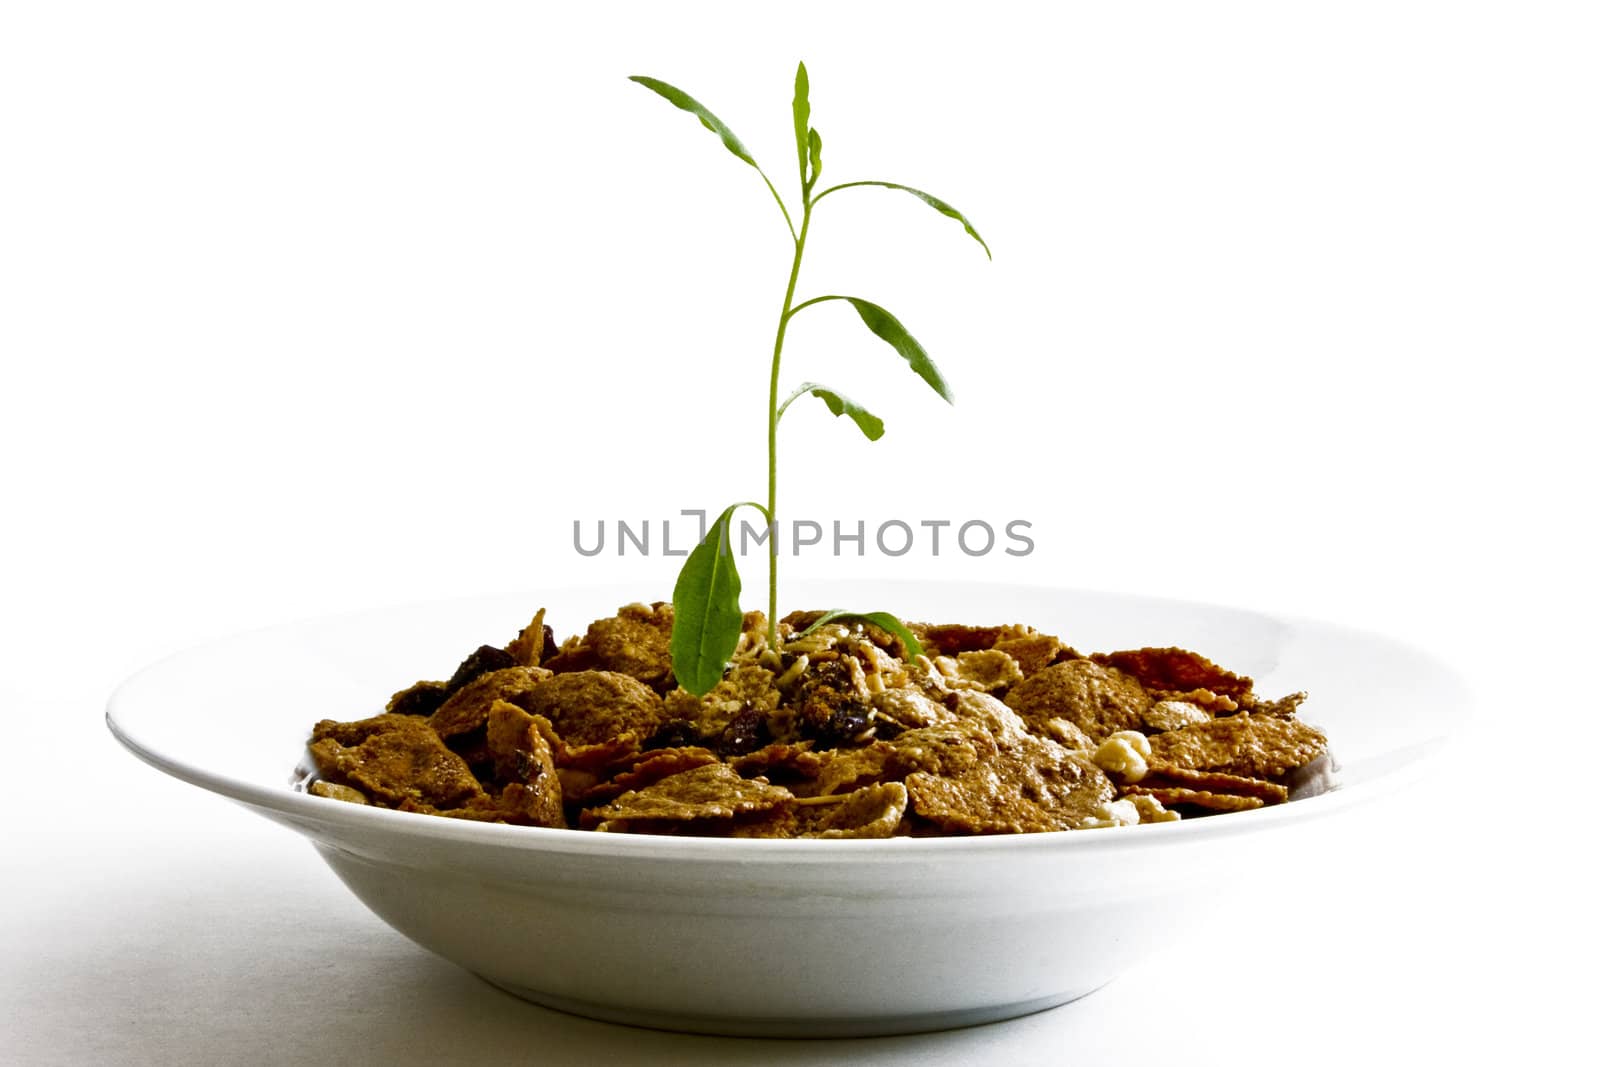 Small plant growing from cereal in bowl on white background